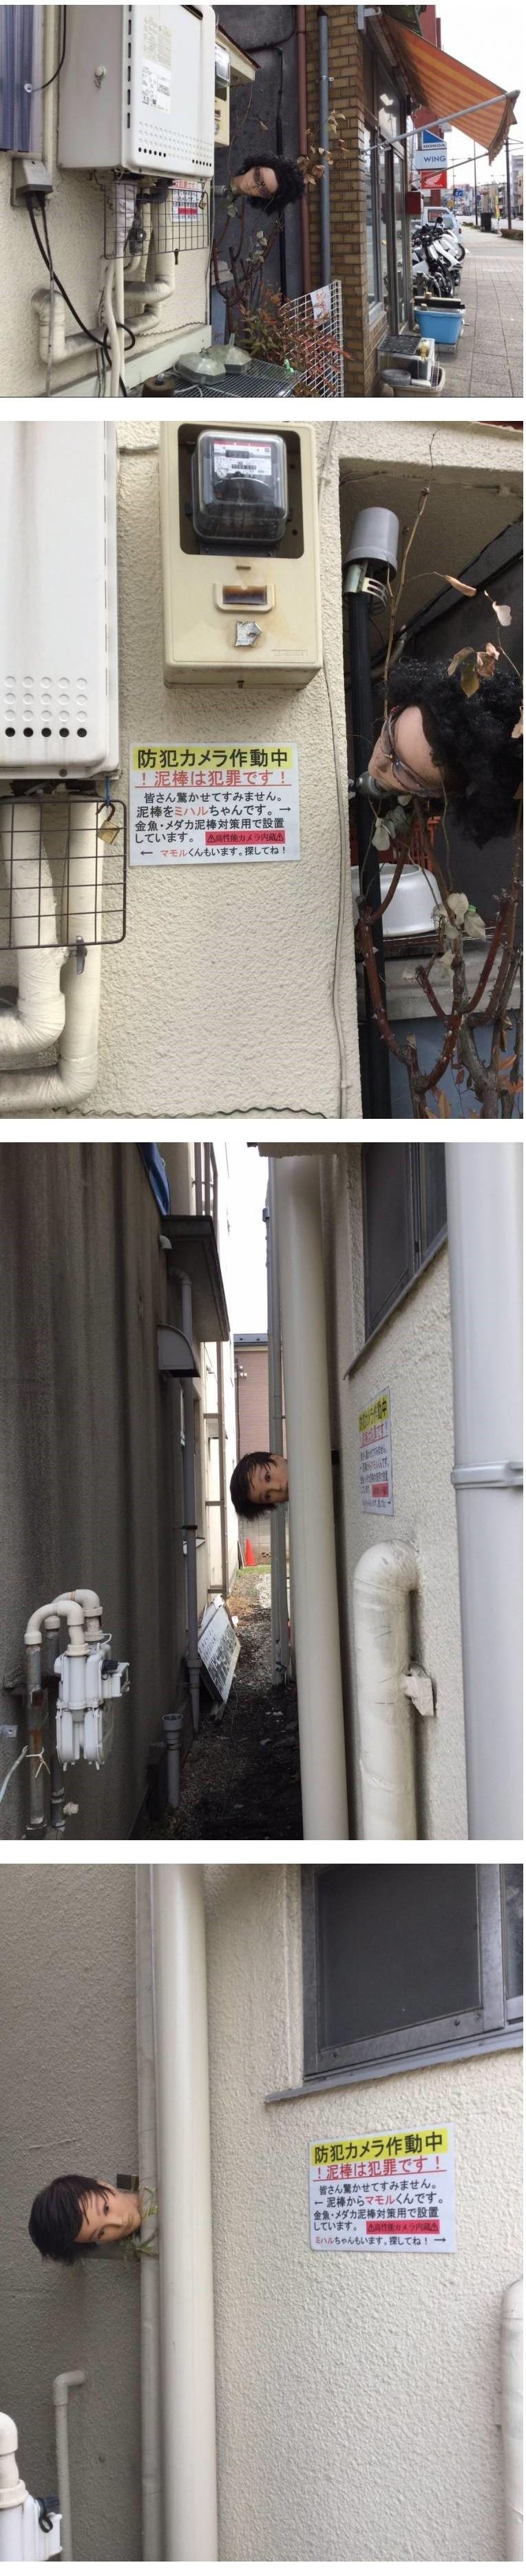 I heard that there are a lot of people doing CCTV in Japan these days.